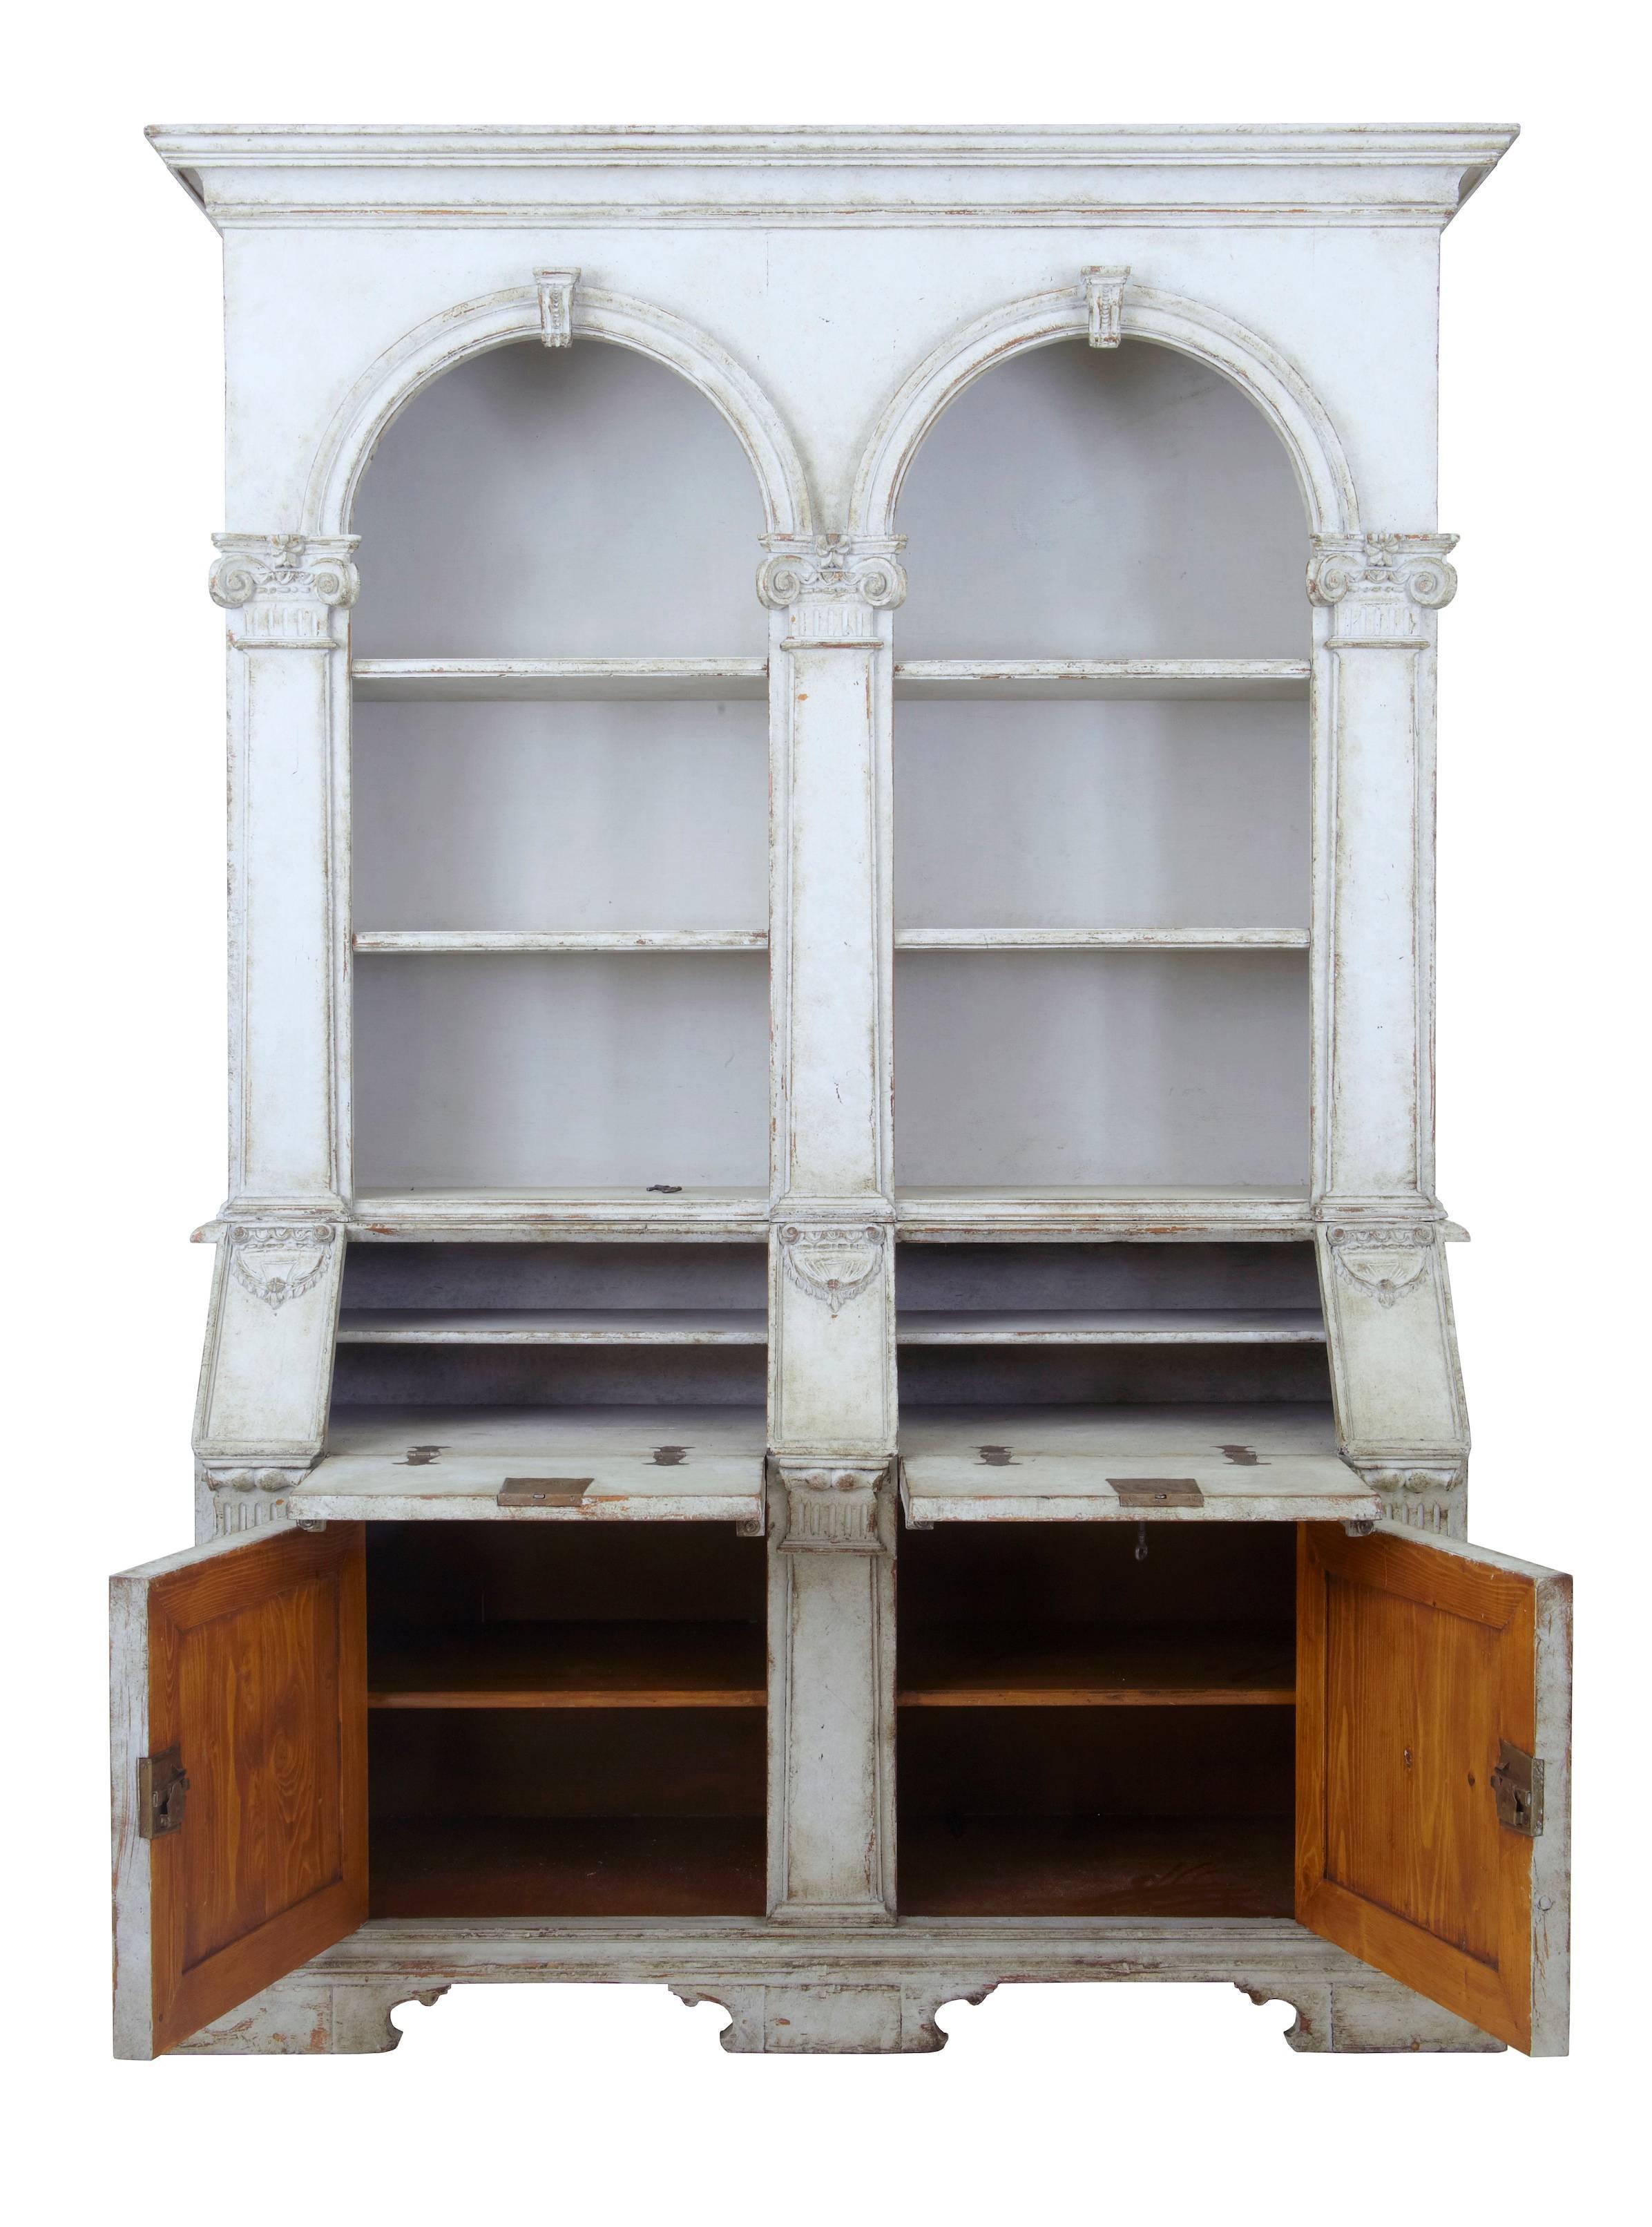 Impressive architectural rare Renaissance Revival double bureau bookcase, circa 1950.
Comprising of two parts.
Top section with two domed recess' containing two shelves in each, flanked either side by columns.
Bottom section comprising of two